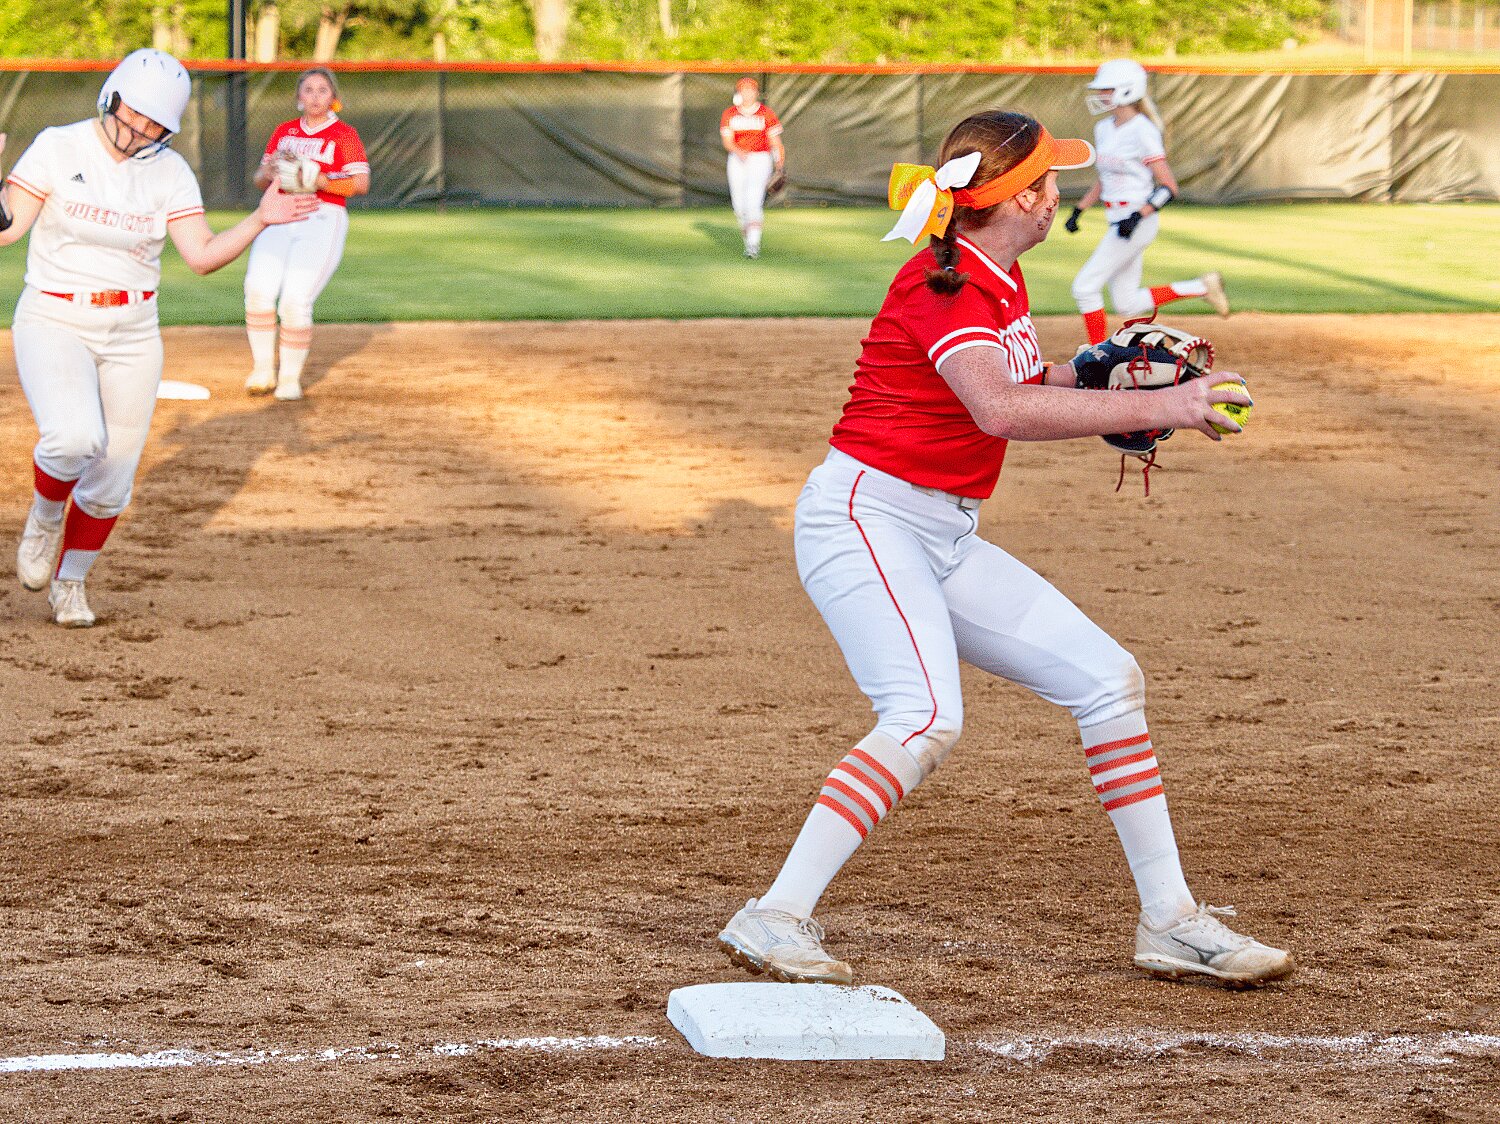 Gracie Finley gets the force out at third before firing to first base.